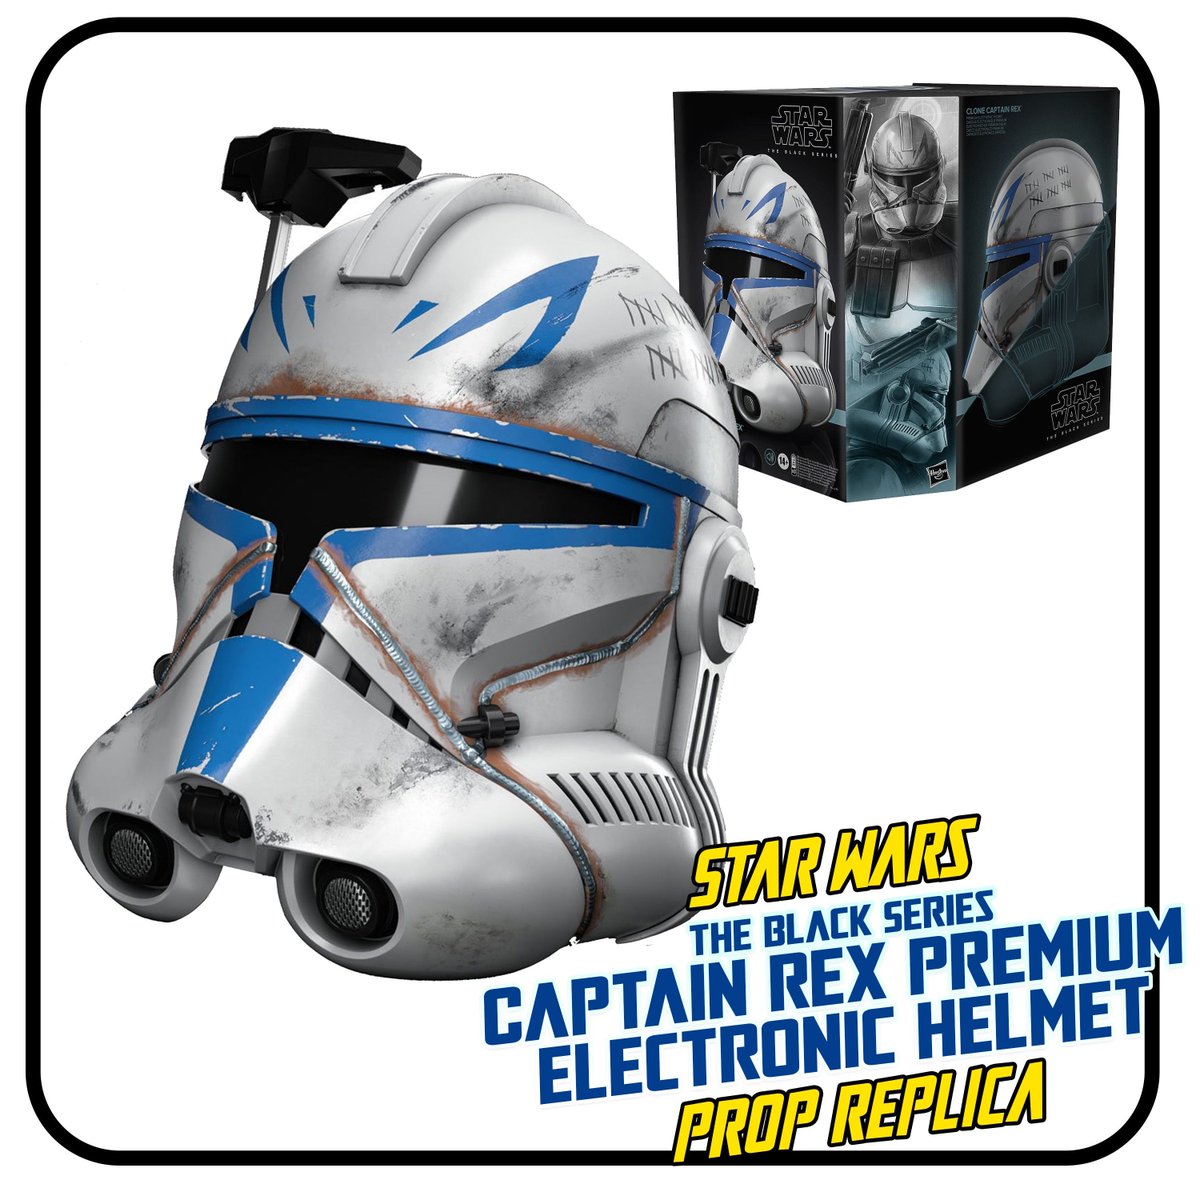 The perfect gift for the good soldier on your Christmas list! Get #CaptainRex’s Black Series Prop Replica helmet from @EntEarth now!

Order here 👉 buff.ly/3Tj5oAv

#StarWars #Ahsoka #StarWarsCollecting #FreeProduct #iCollectAtEE #EntertainmentEarth #Affiliate #Ad